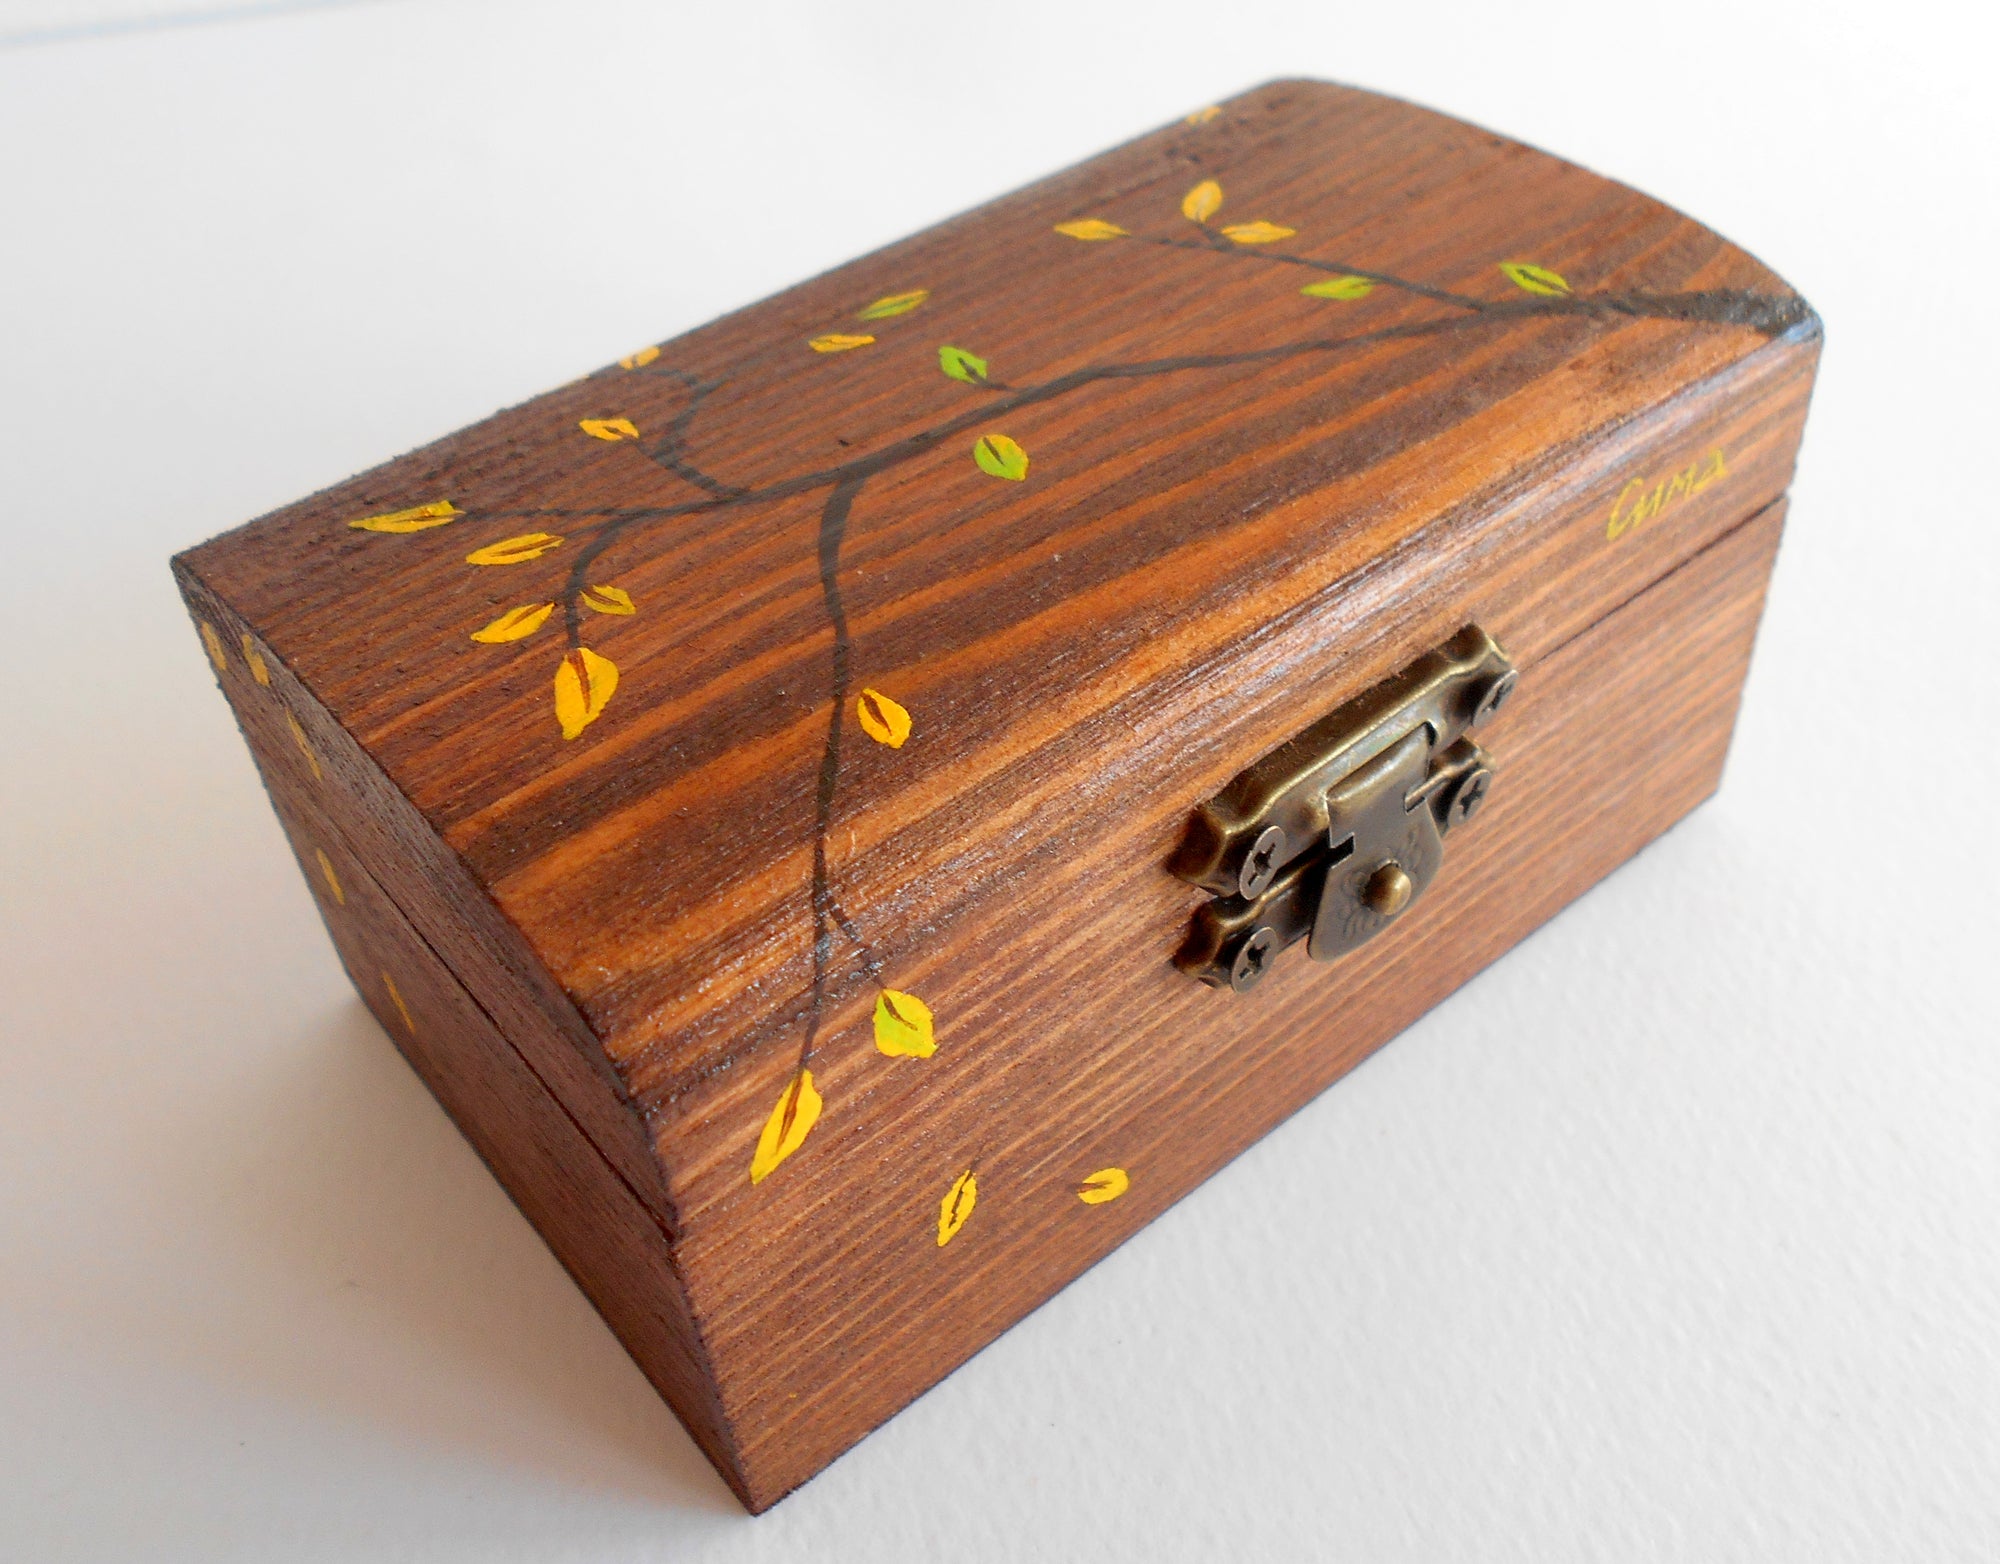 Autumn leaves art wooden ring box- acrylic painted rectangular box- wooden box with bronze colored hinges- fir tree wood box- Fall theme